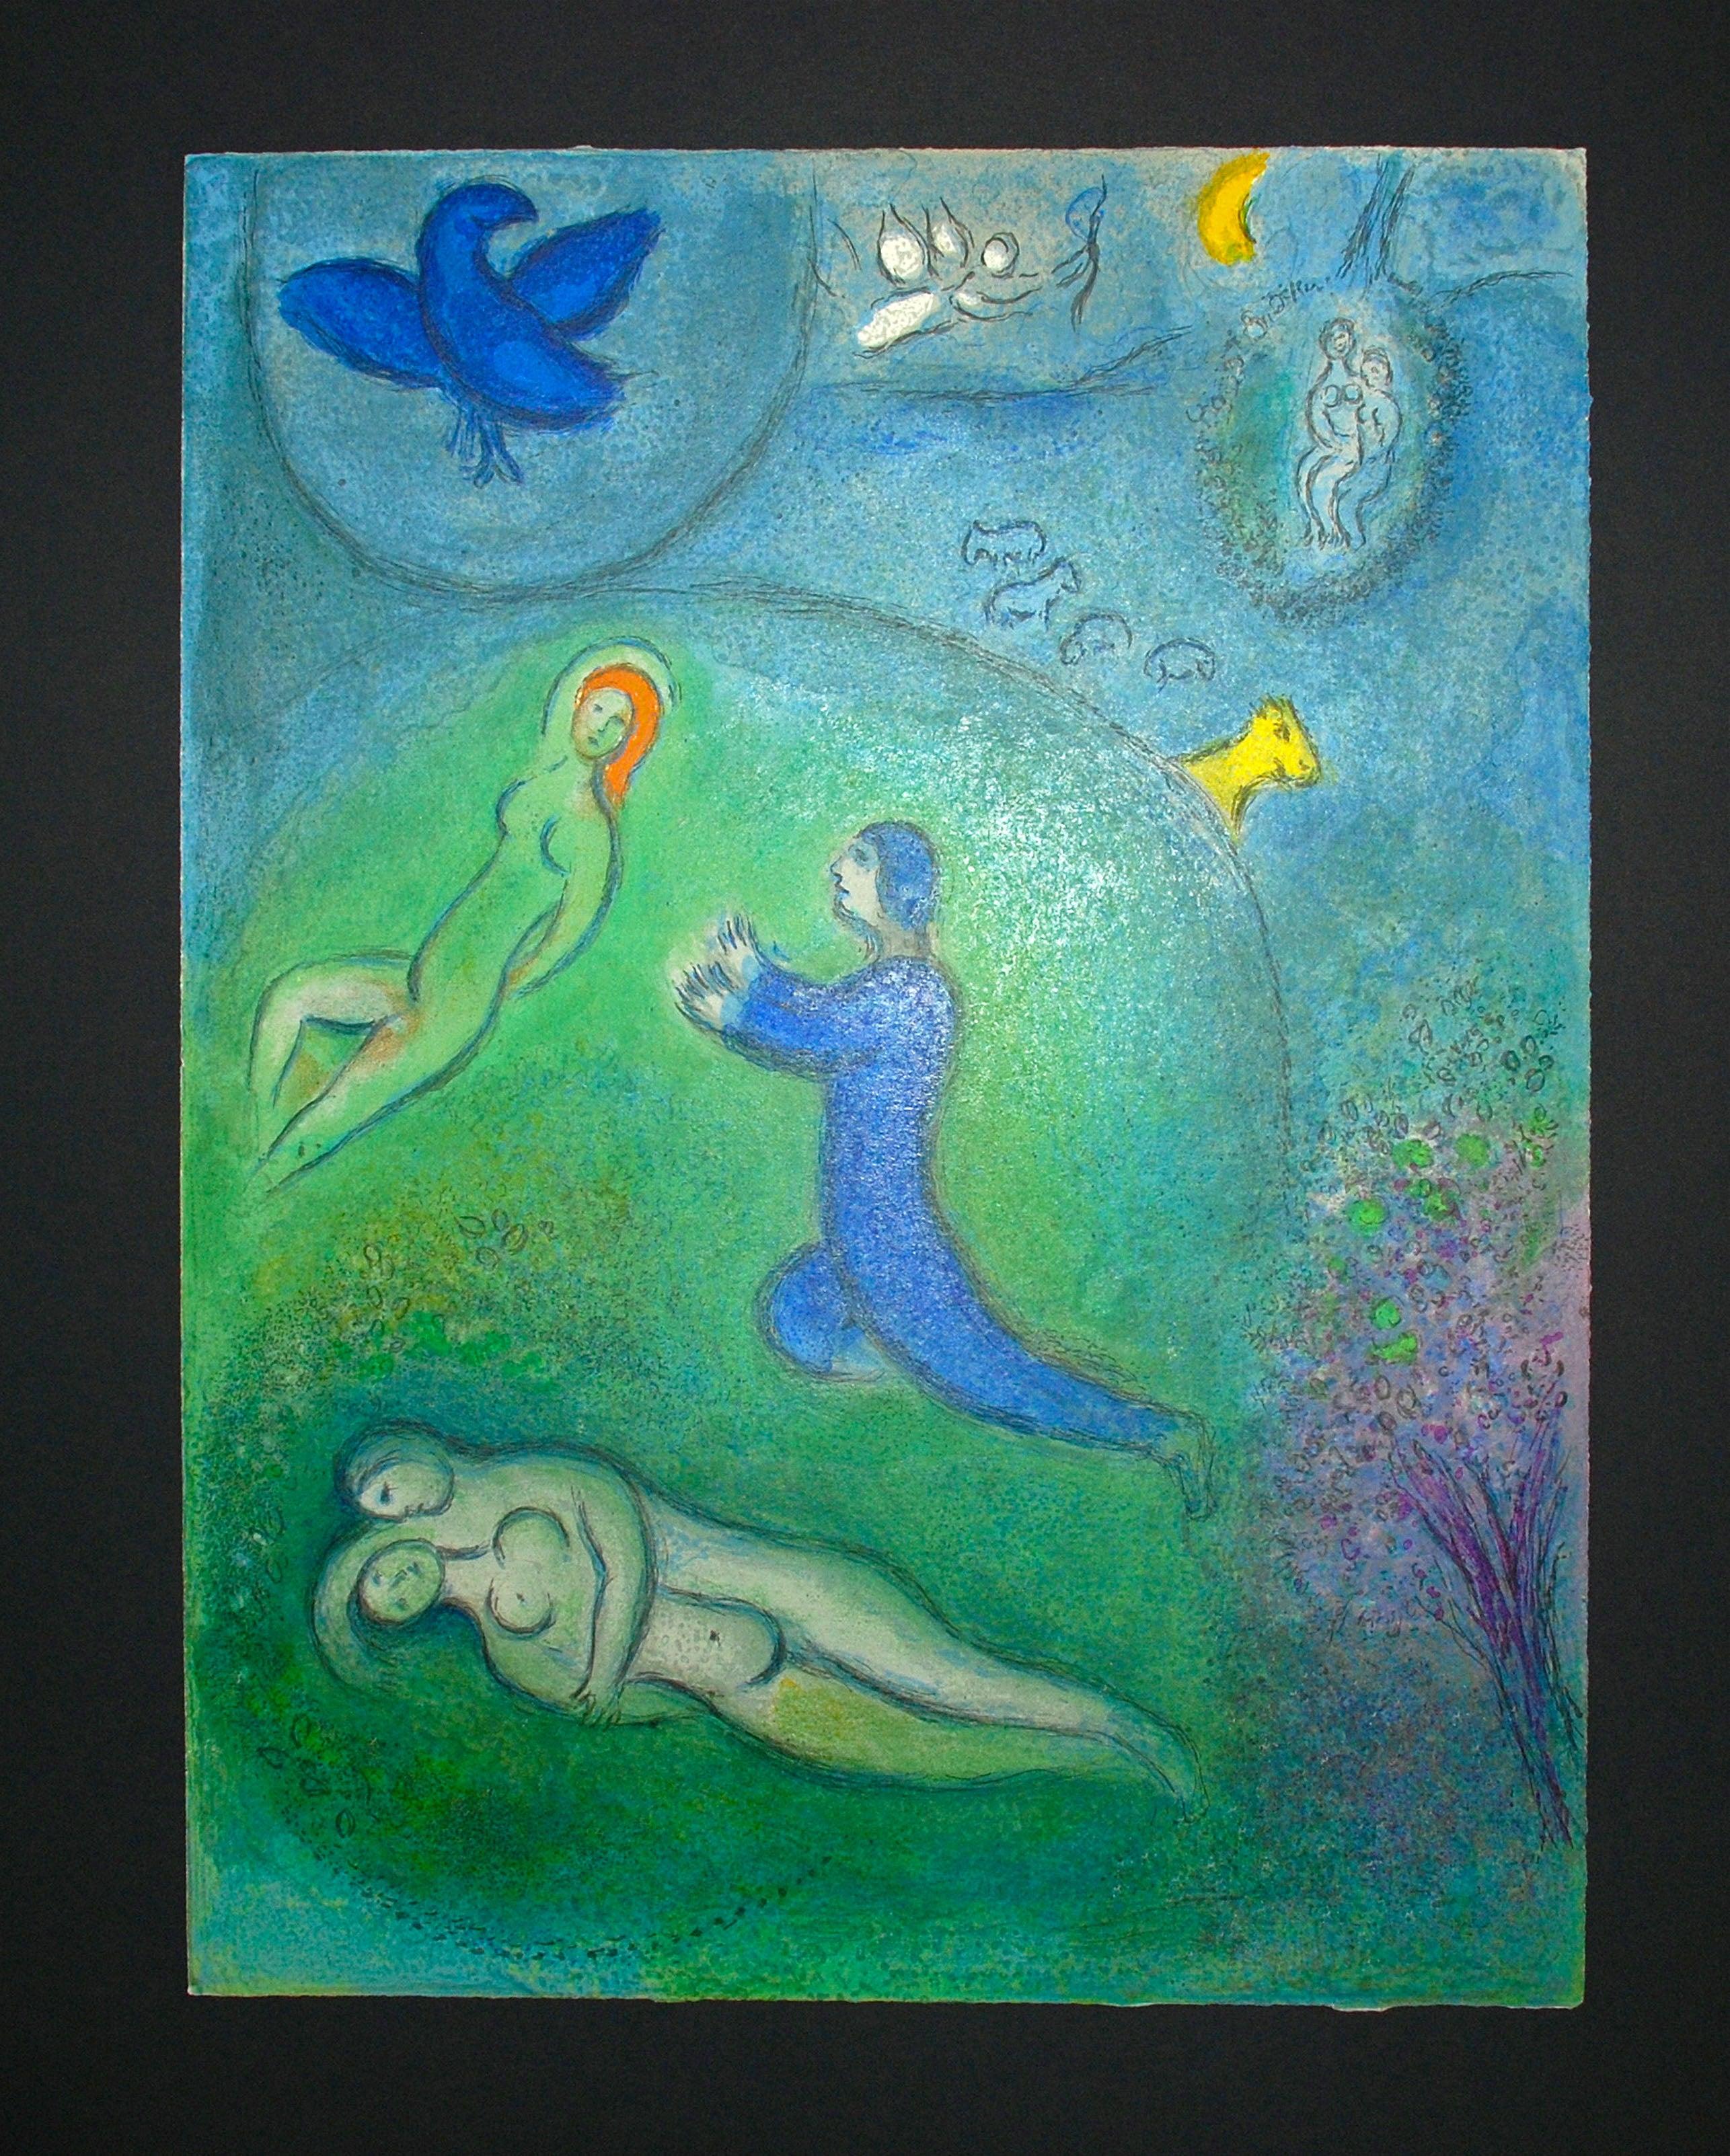 Artist: Marc Chagall
Title: Daphnis and Lycenion
Portfolio: Daphnis and Chloe
Medium: Lithograph on Arches wove paper
Year: 1961
Edition: 189/250
Frame Size: 31